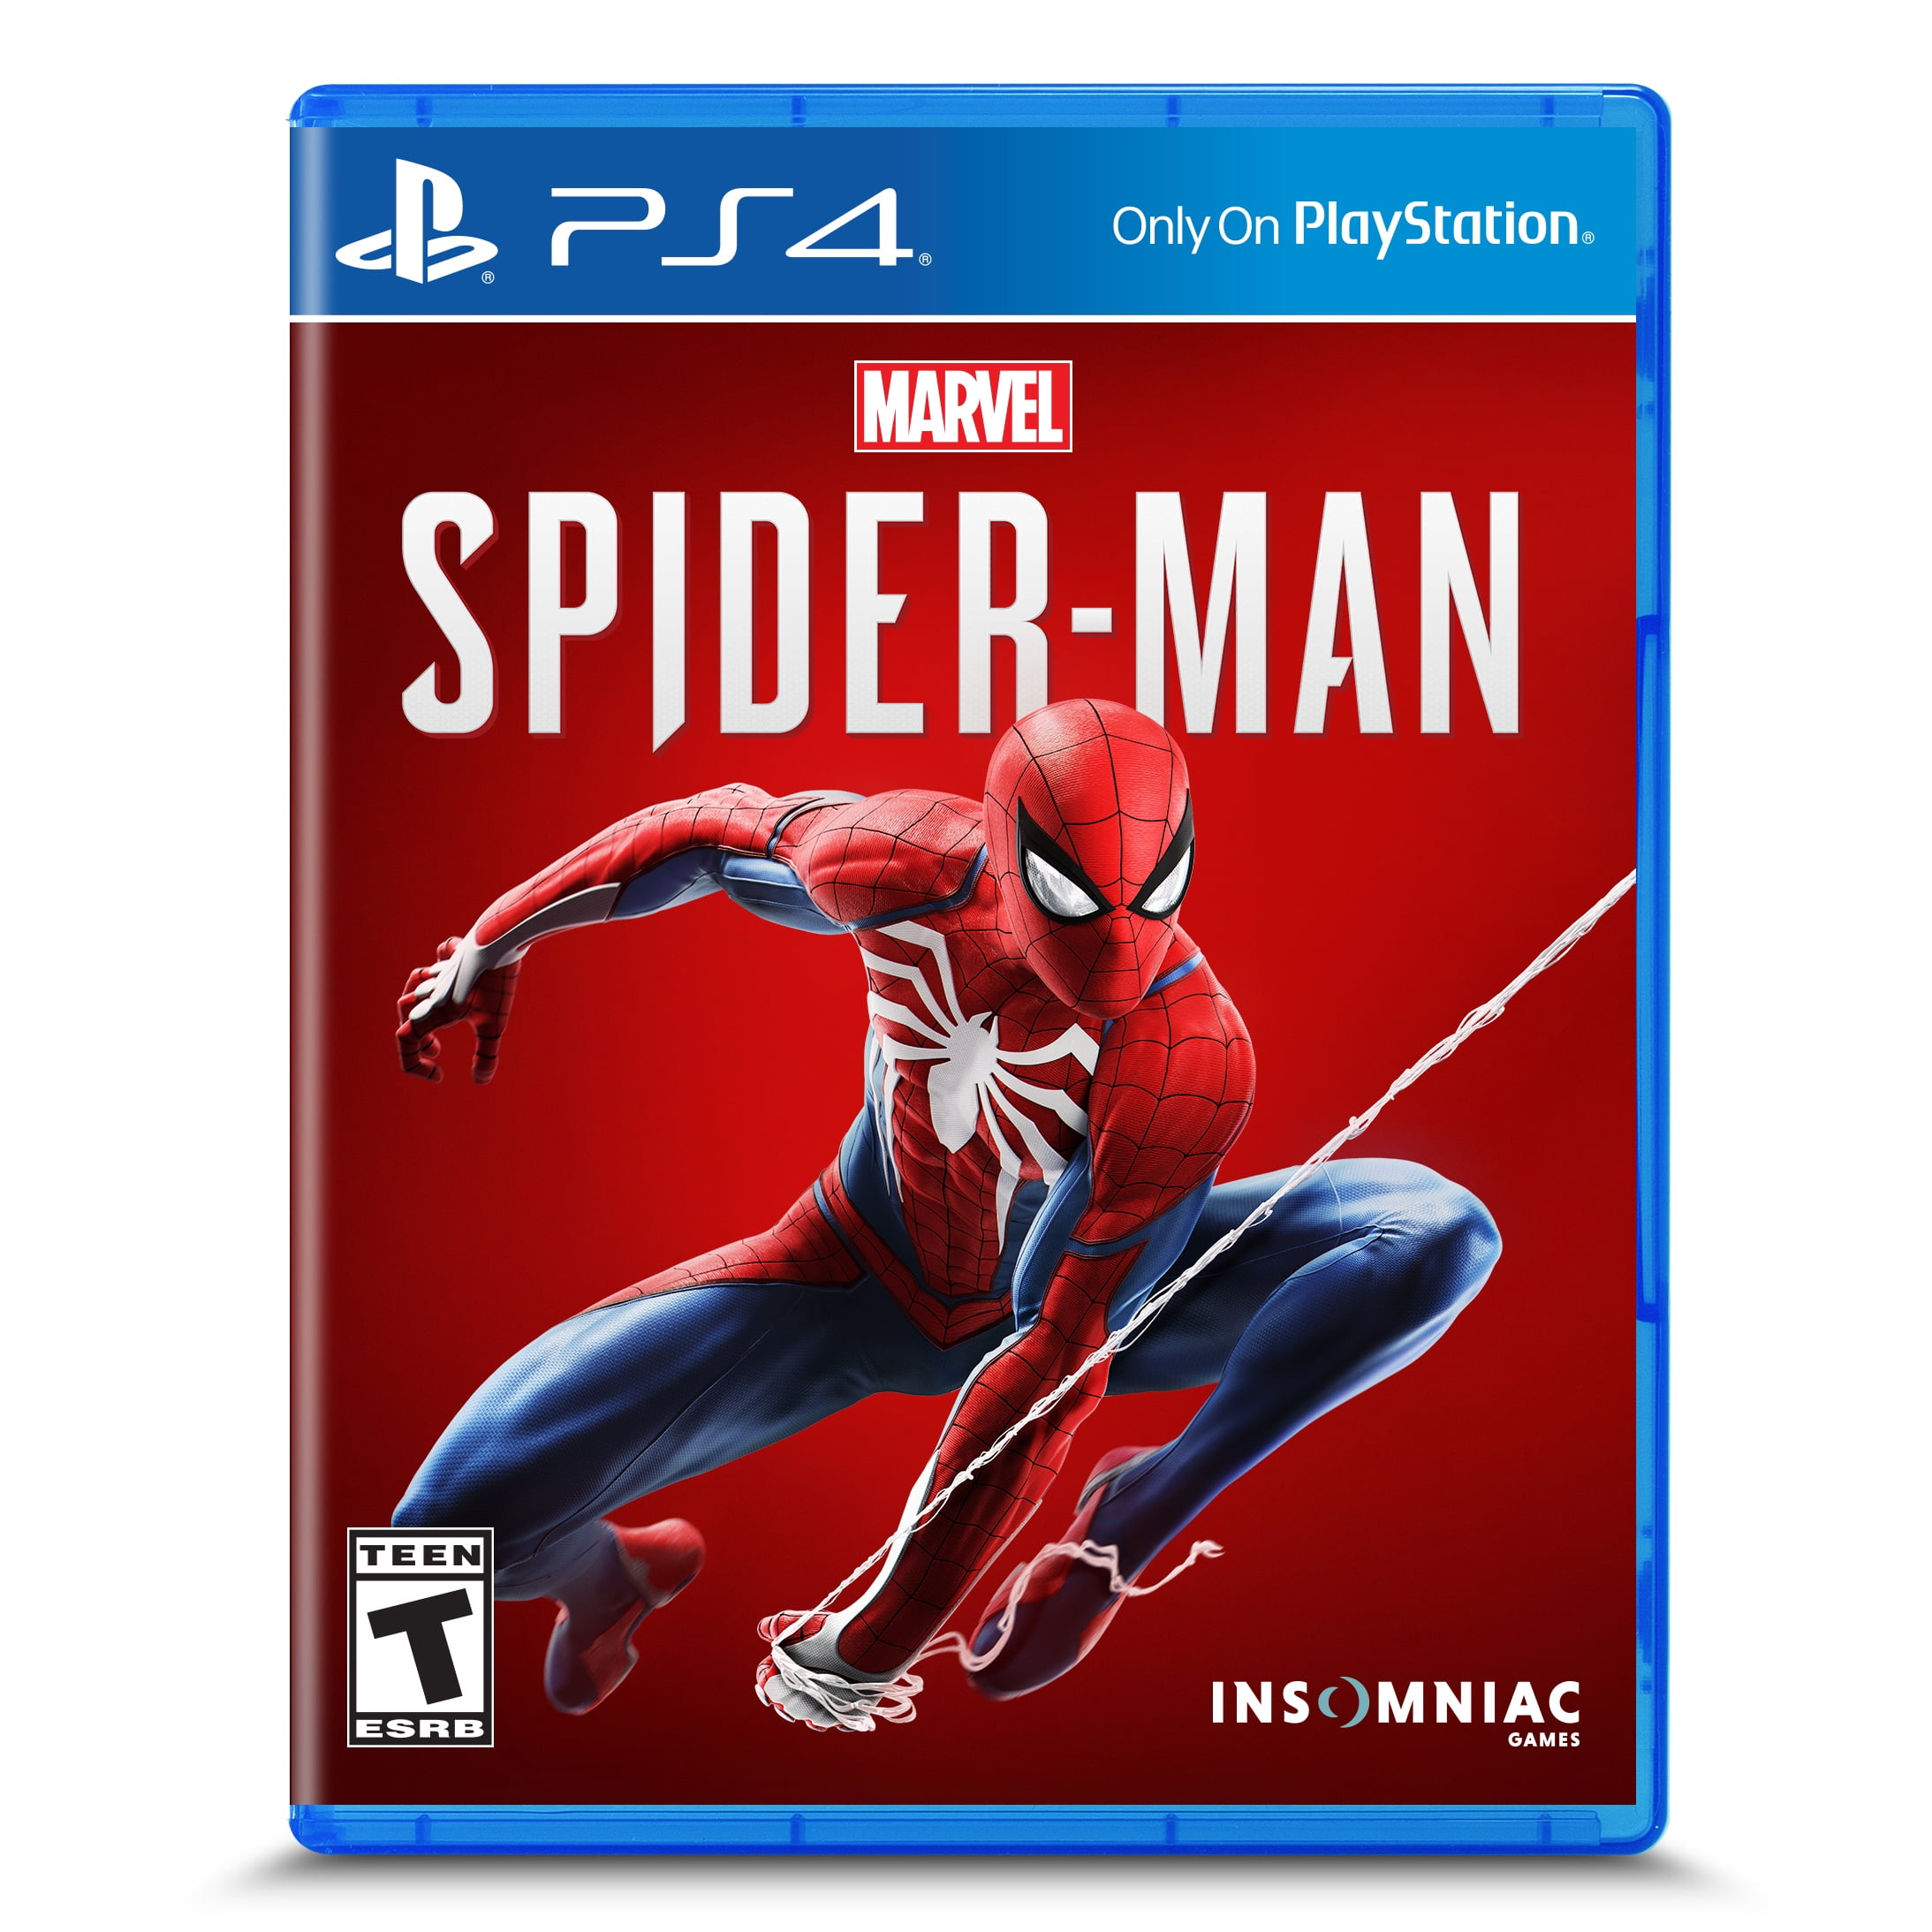 Spider-Man' (2018) PS4 Review: The Good, The Bad And The Spidey